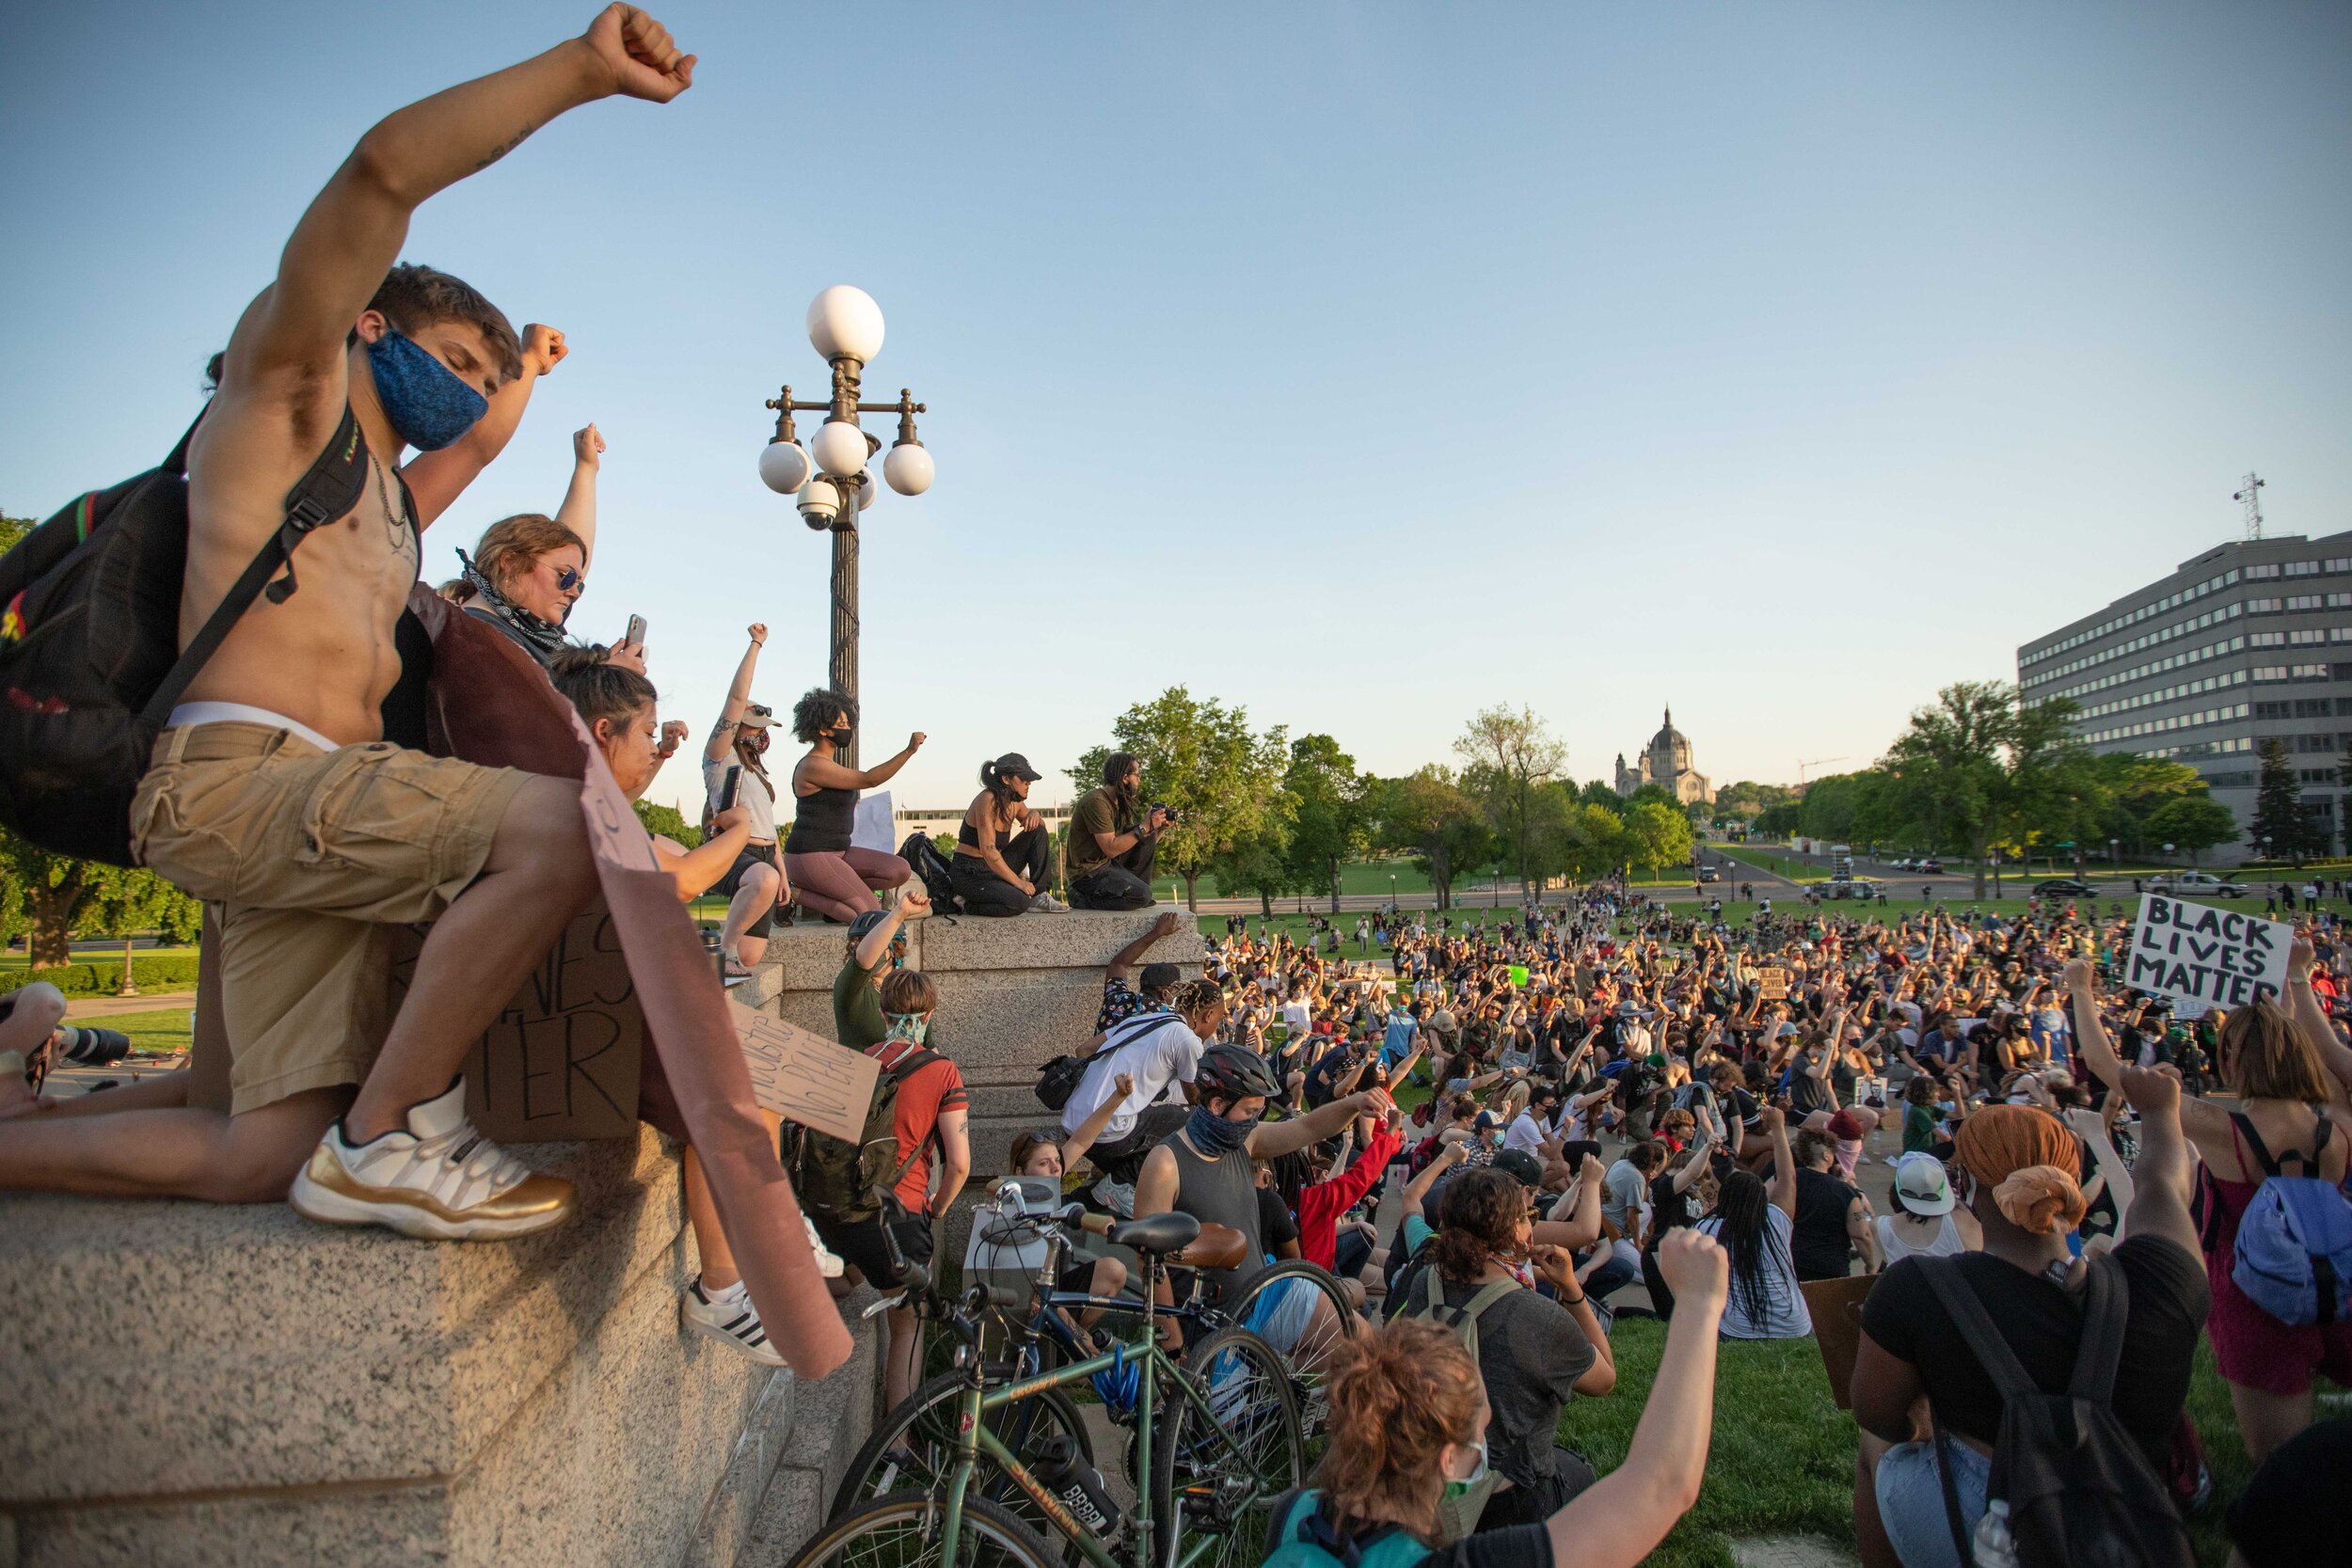  During a moment of silence for George Floyd proetsters bow their heads and raise their fists in the air while on the steps of the Minnesota State Capitol building in Saint Paul, Minnesota on June 1, 2020. Chris Juhn/Zenger 